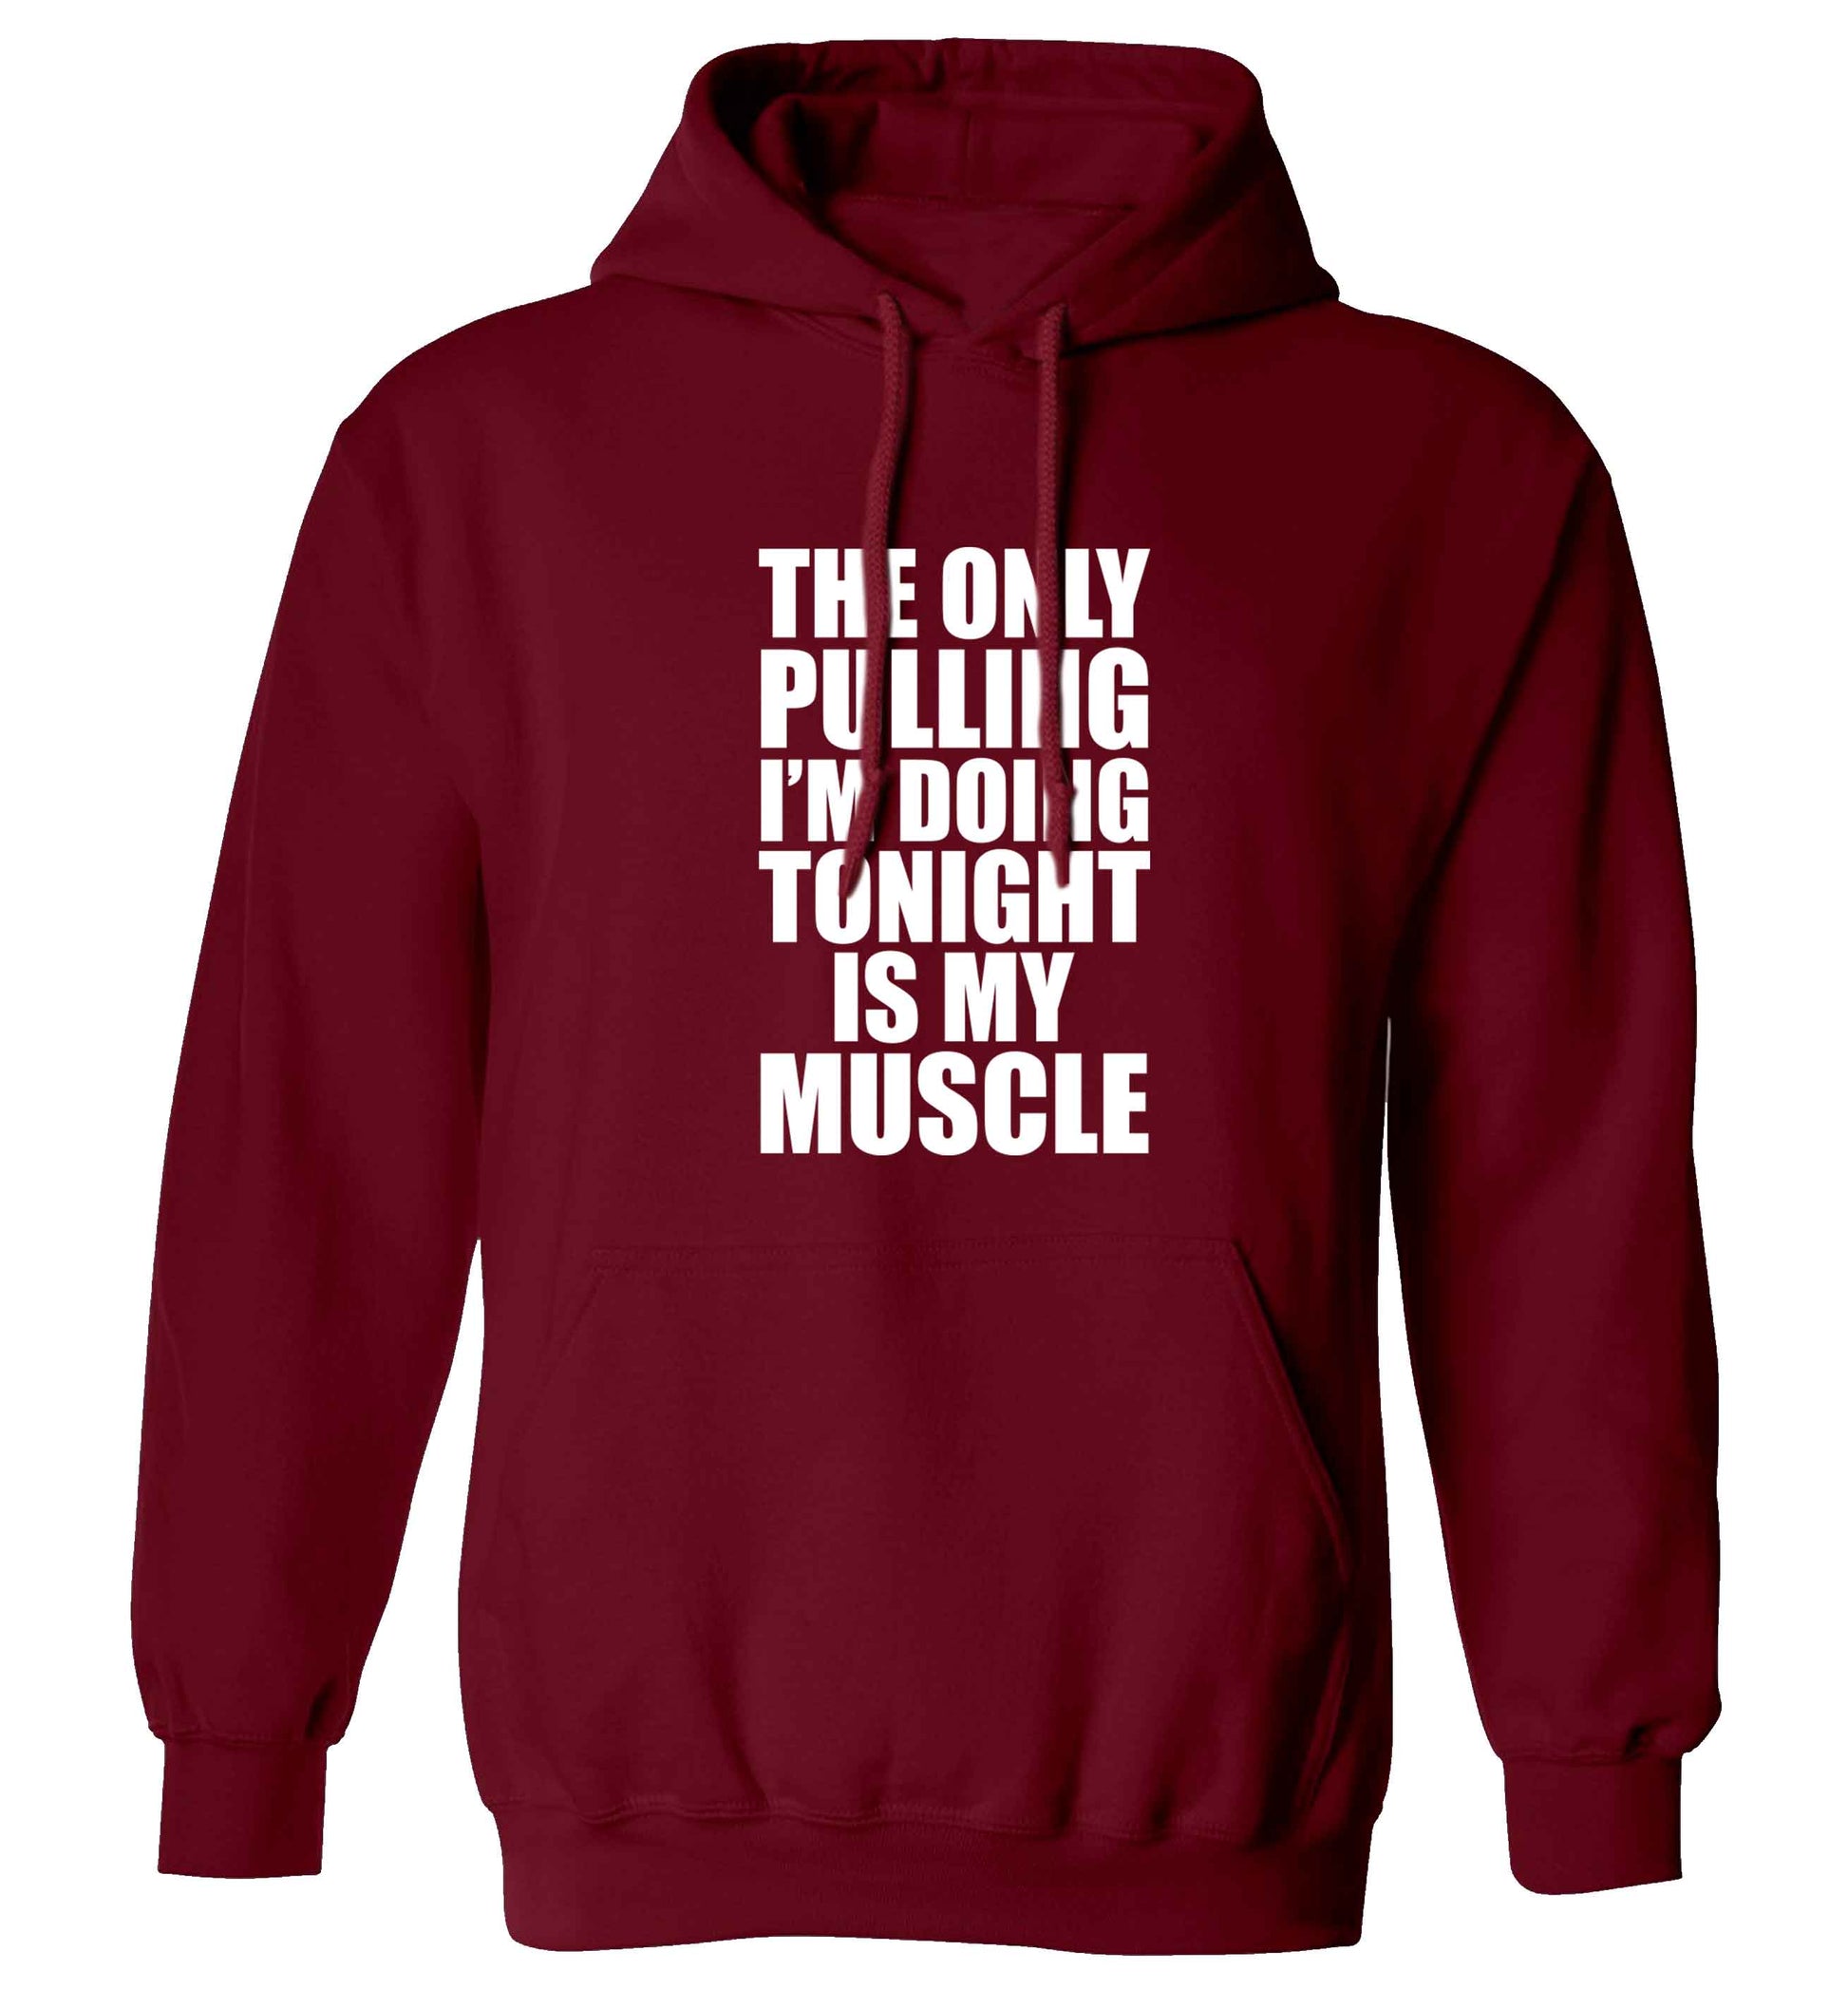 The only pulling I'm doing tonight is my muscle adults unisex maroon hoodie 2XL